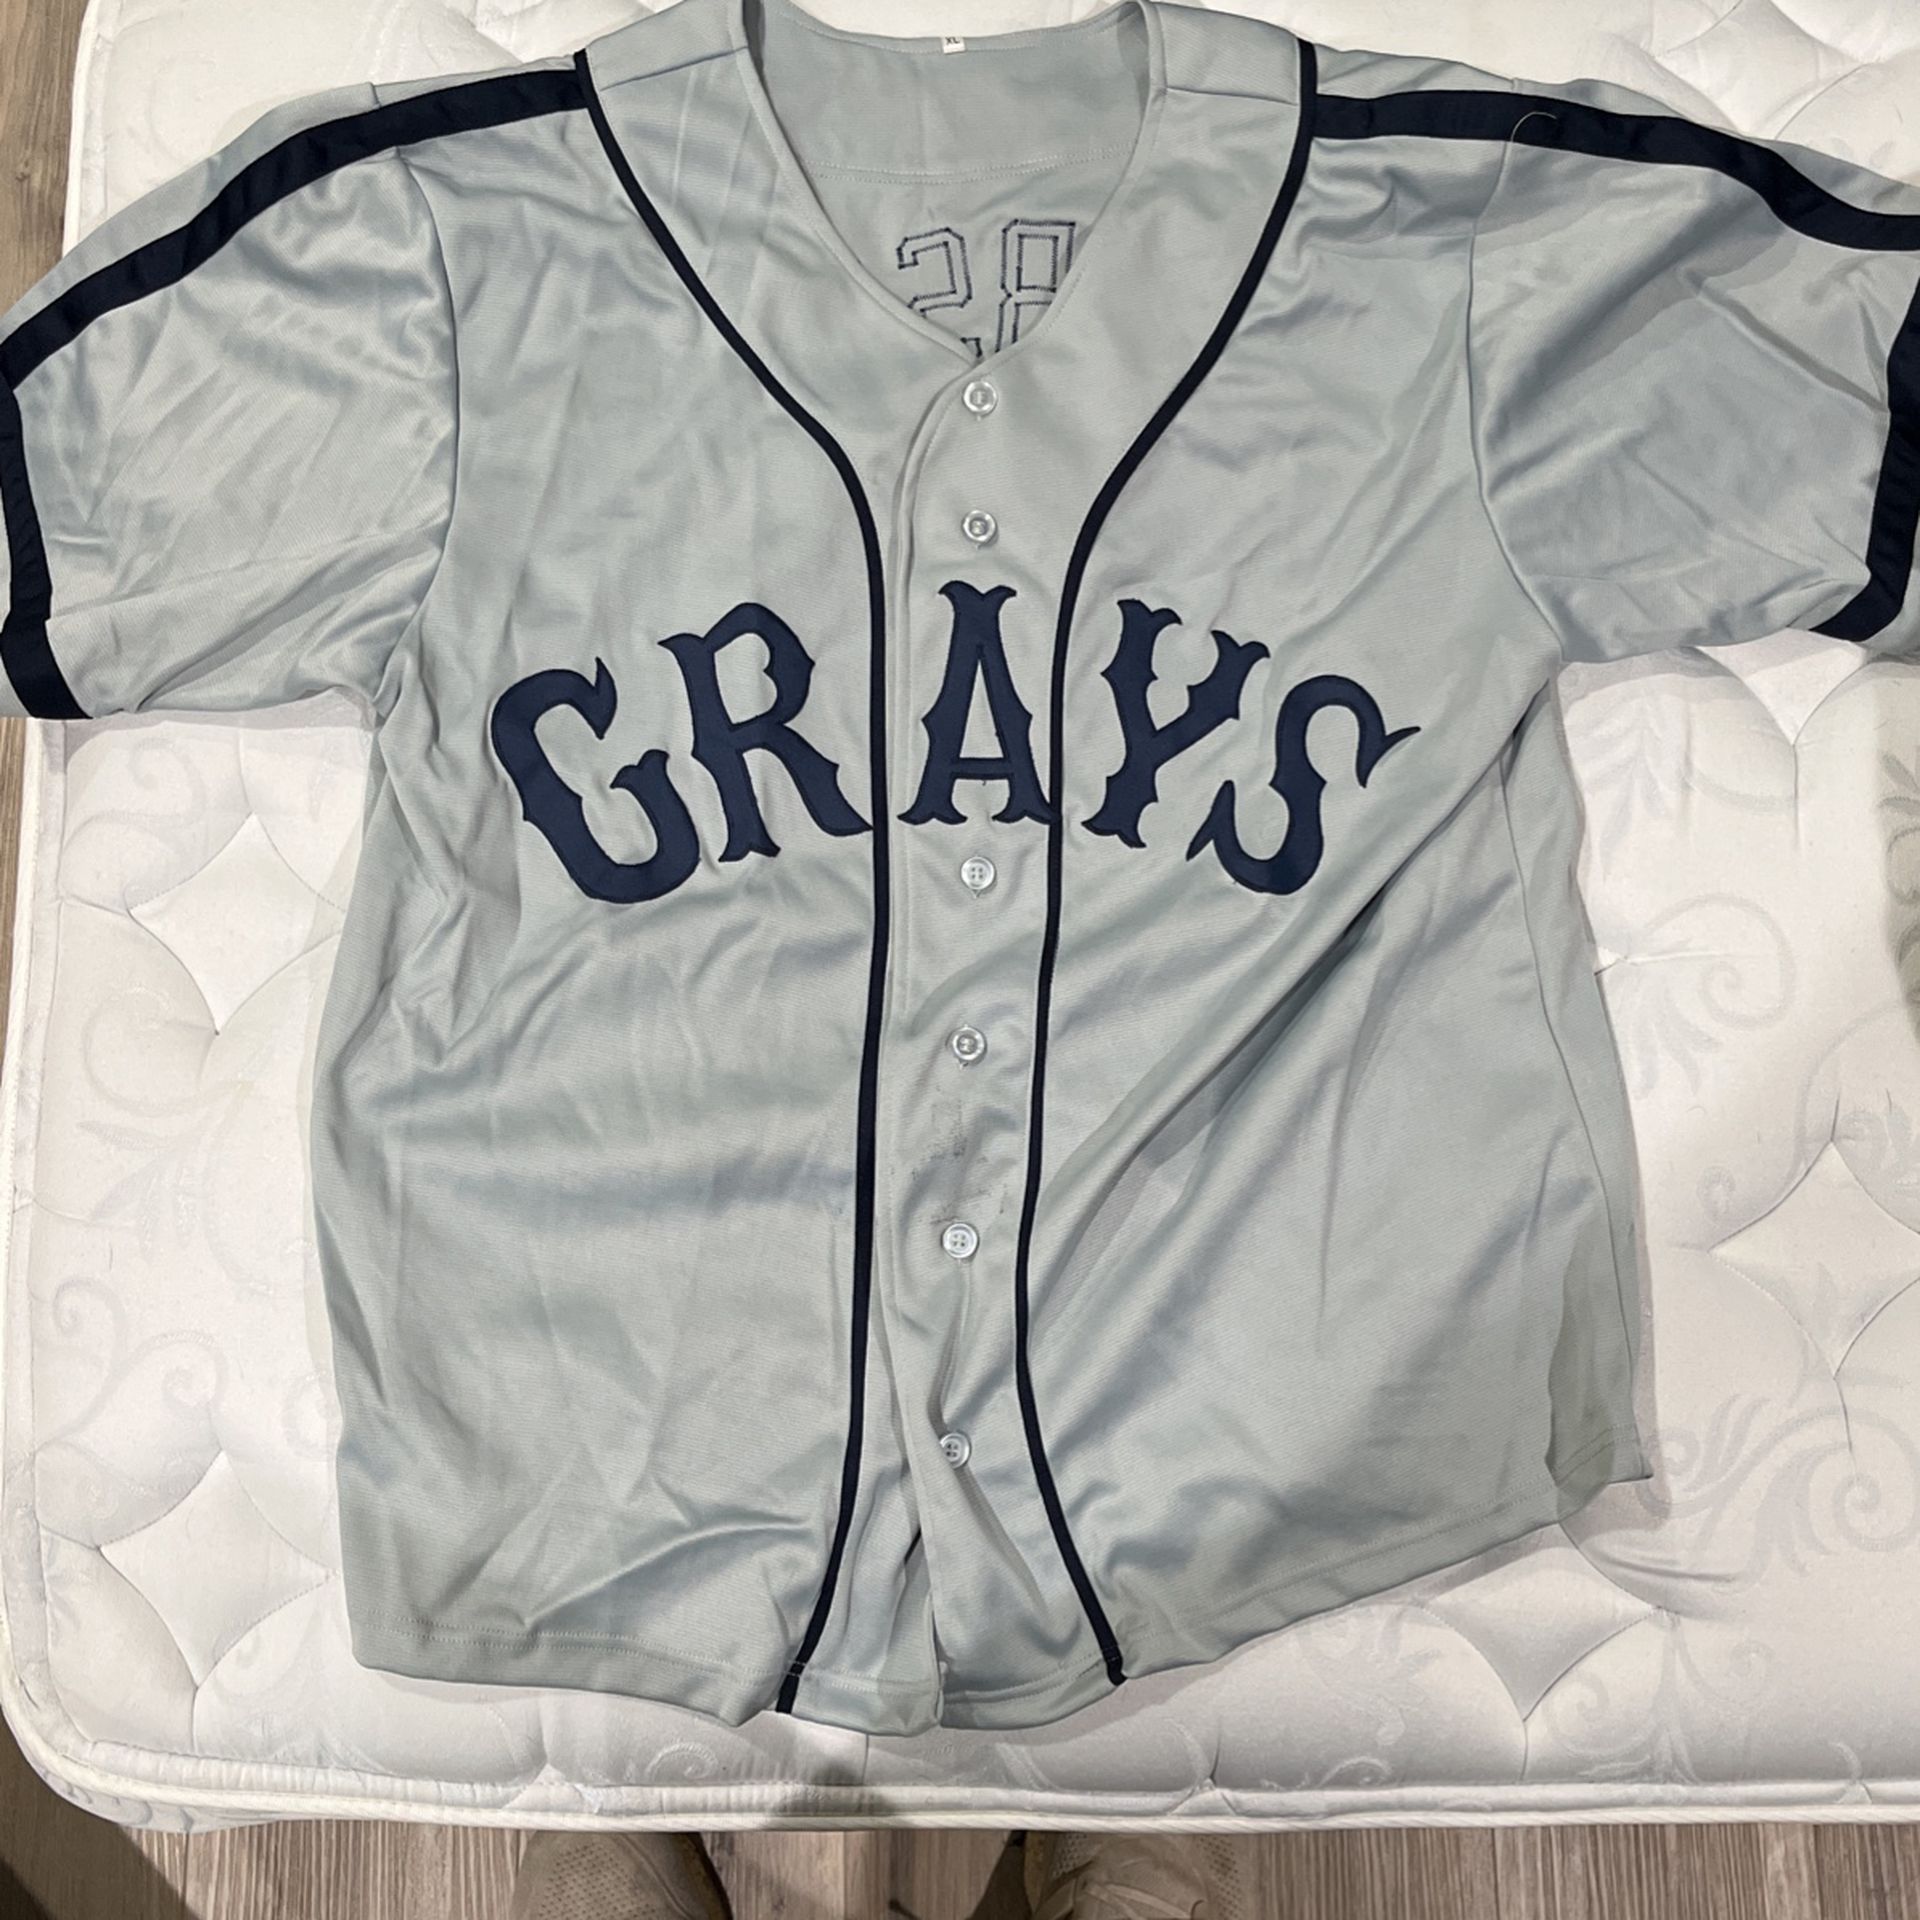 Josh Gibson #20 Baseball Jersey Homestead Grays Negro Stitched for Sale in  New Britain, PA - OfferUp